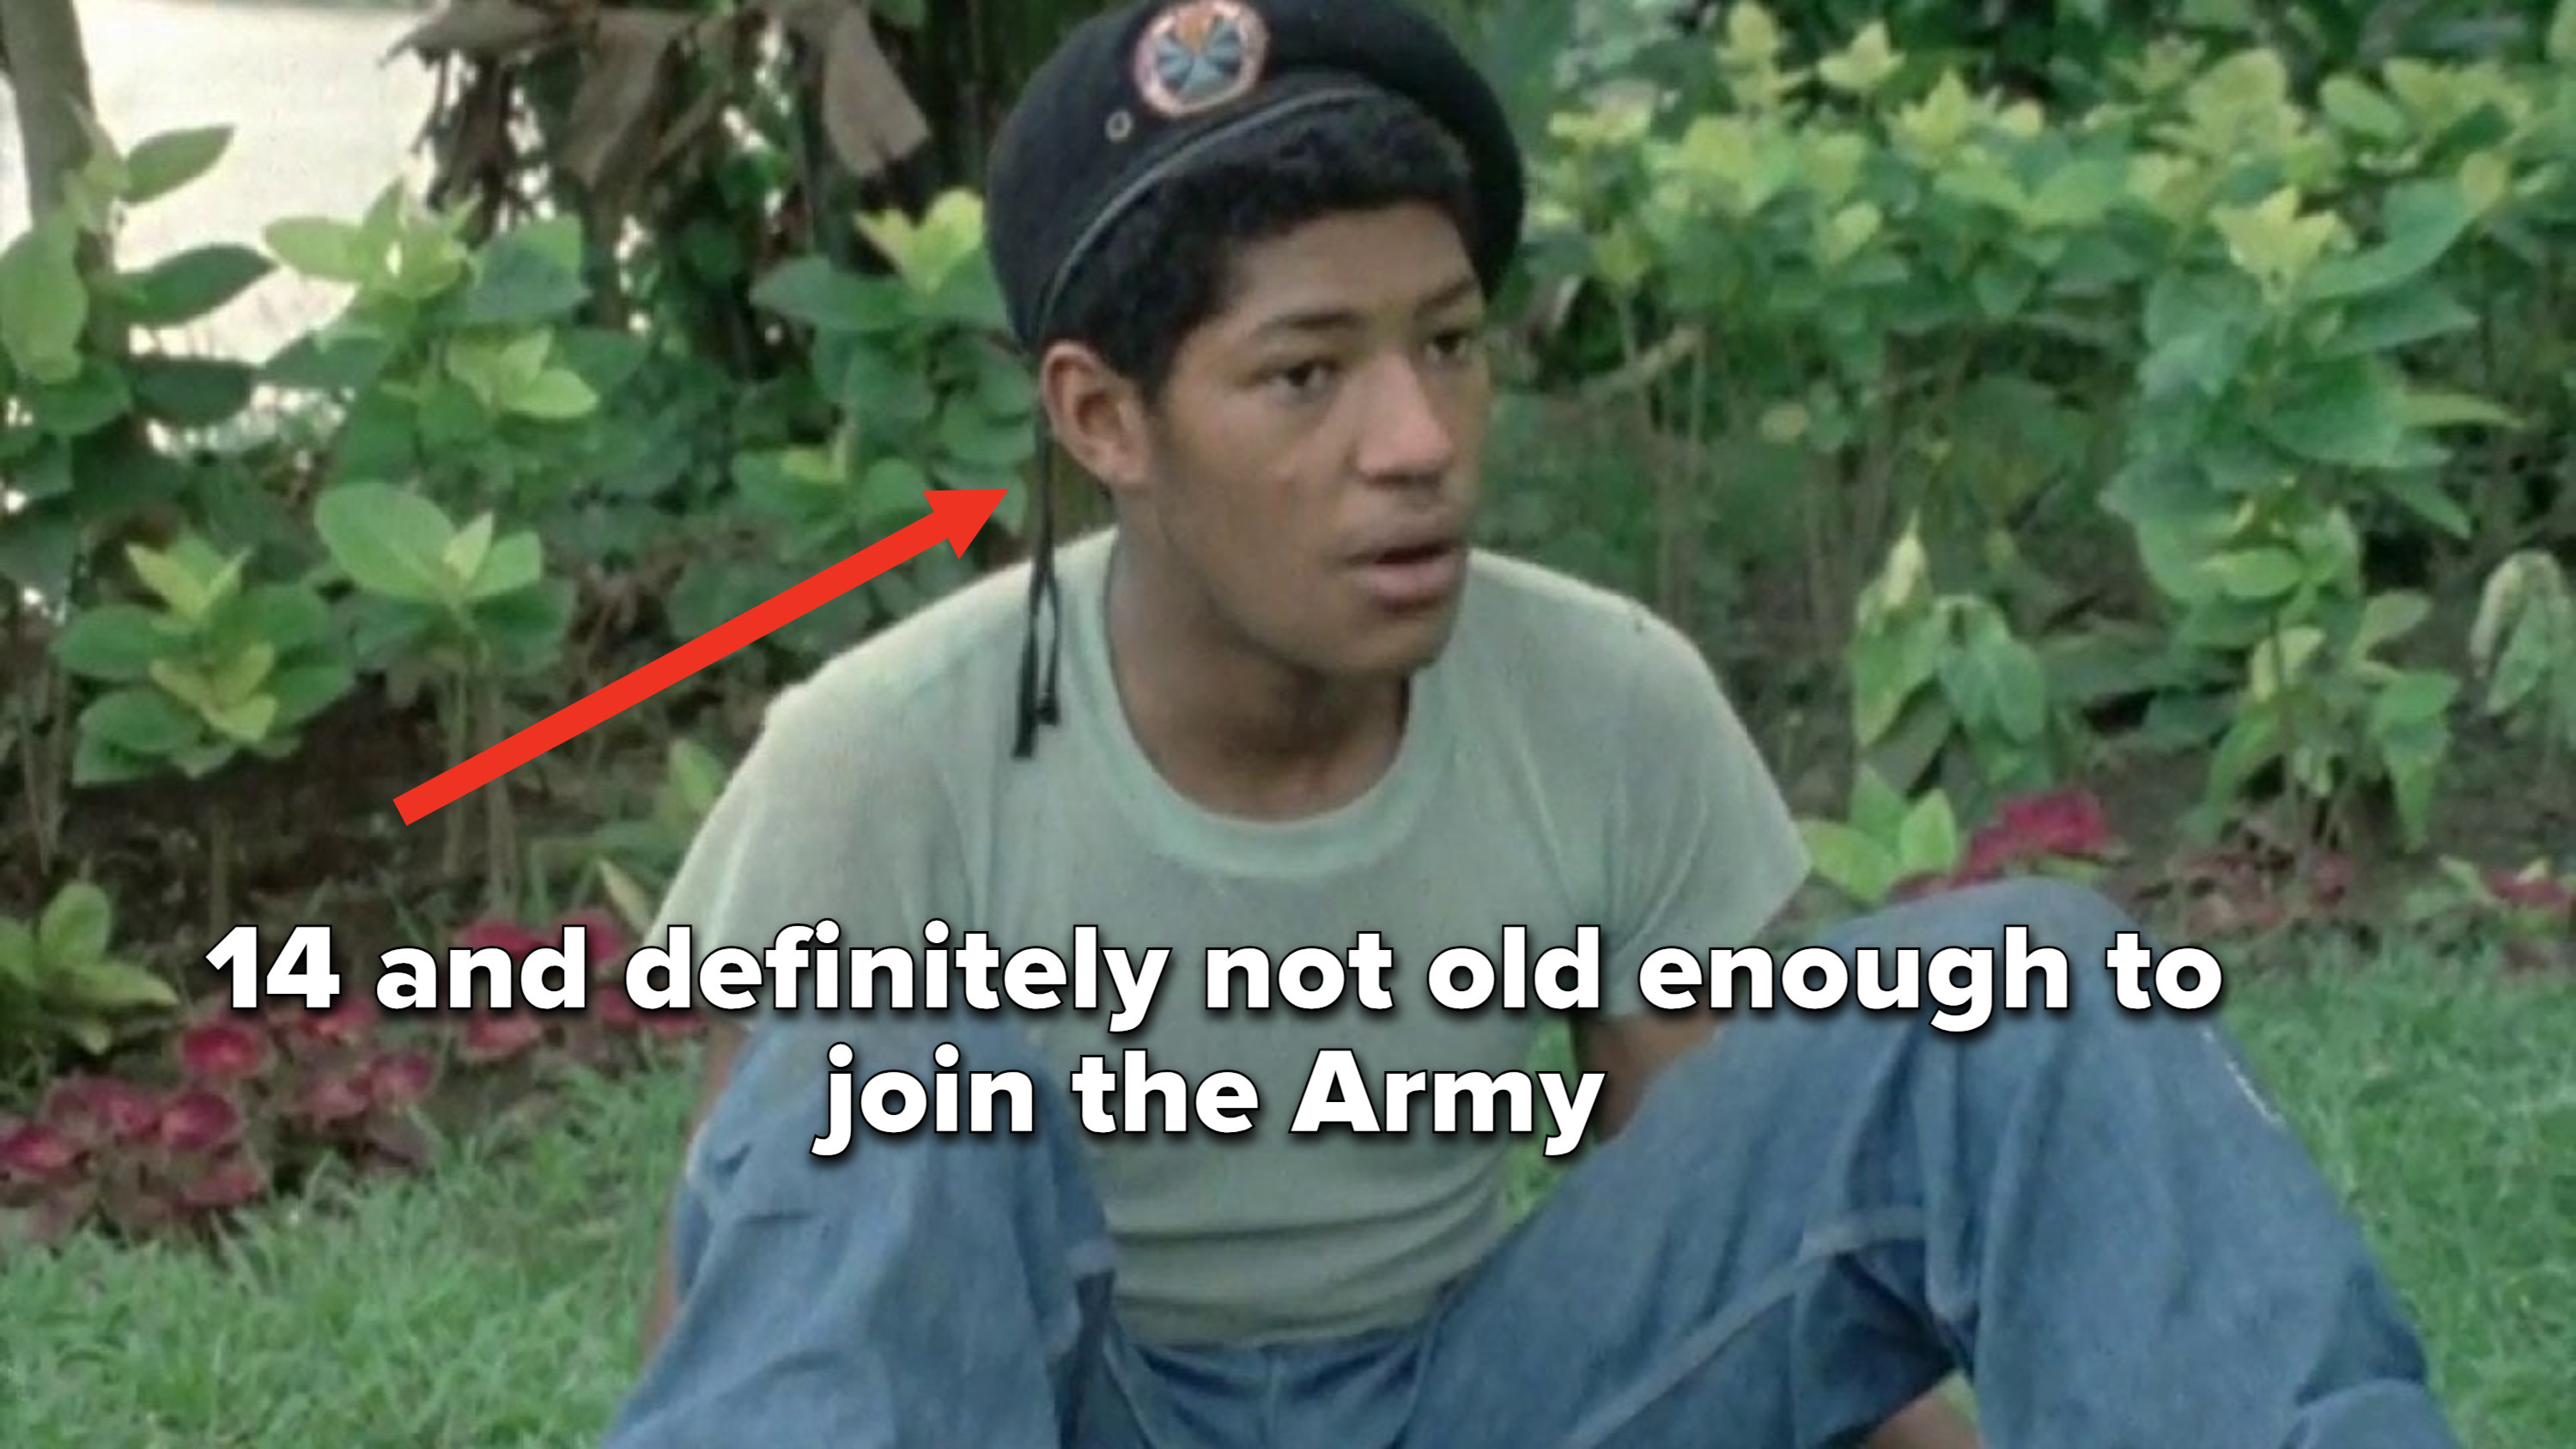 Laurence Fishburne at 14 and definitely not old enough to join the Army